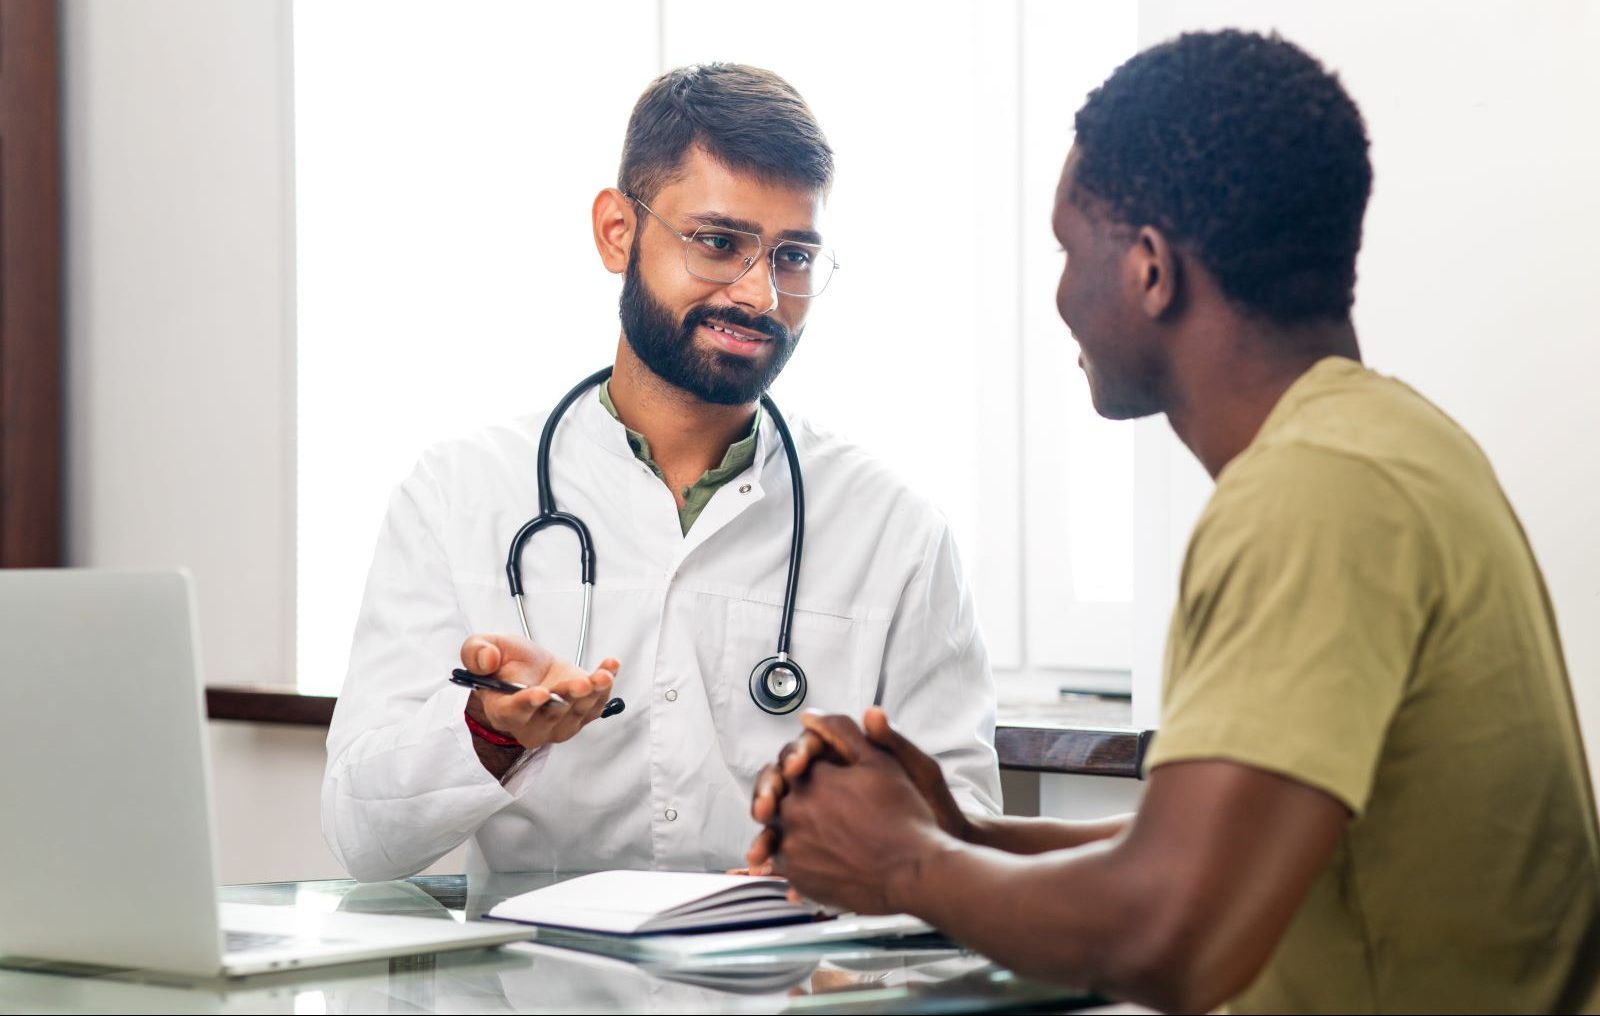 Here are three reasons why it's time for you (or the men in your life) to head to the doctor, according to an expert.